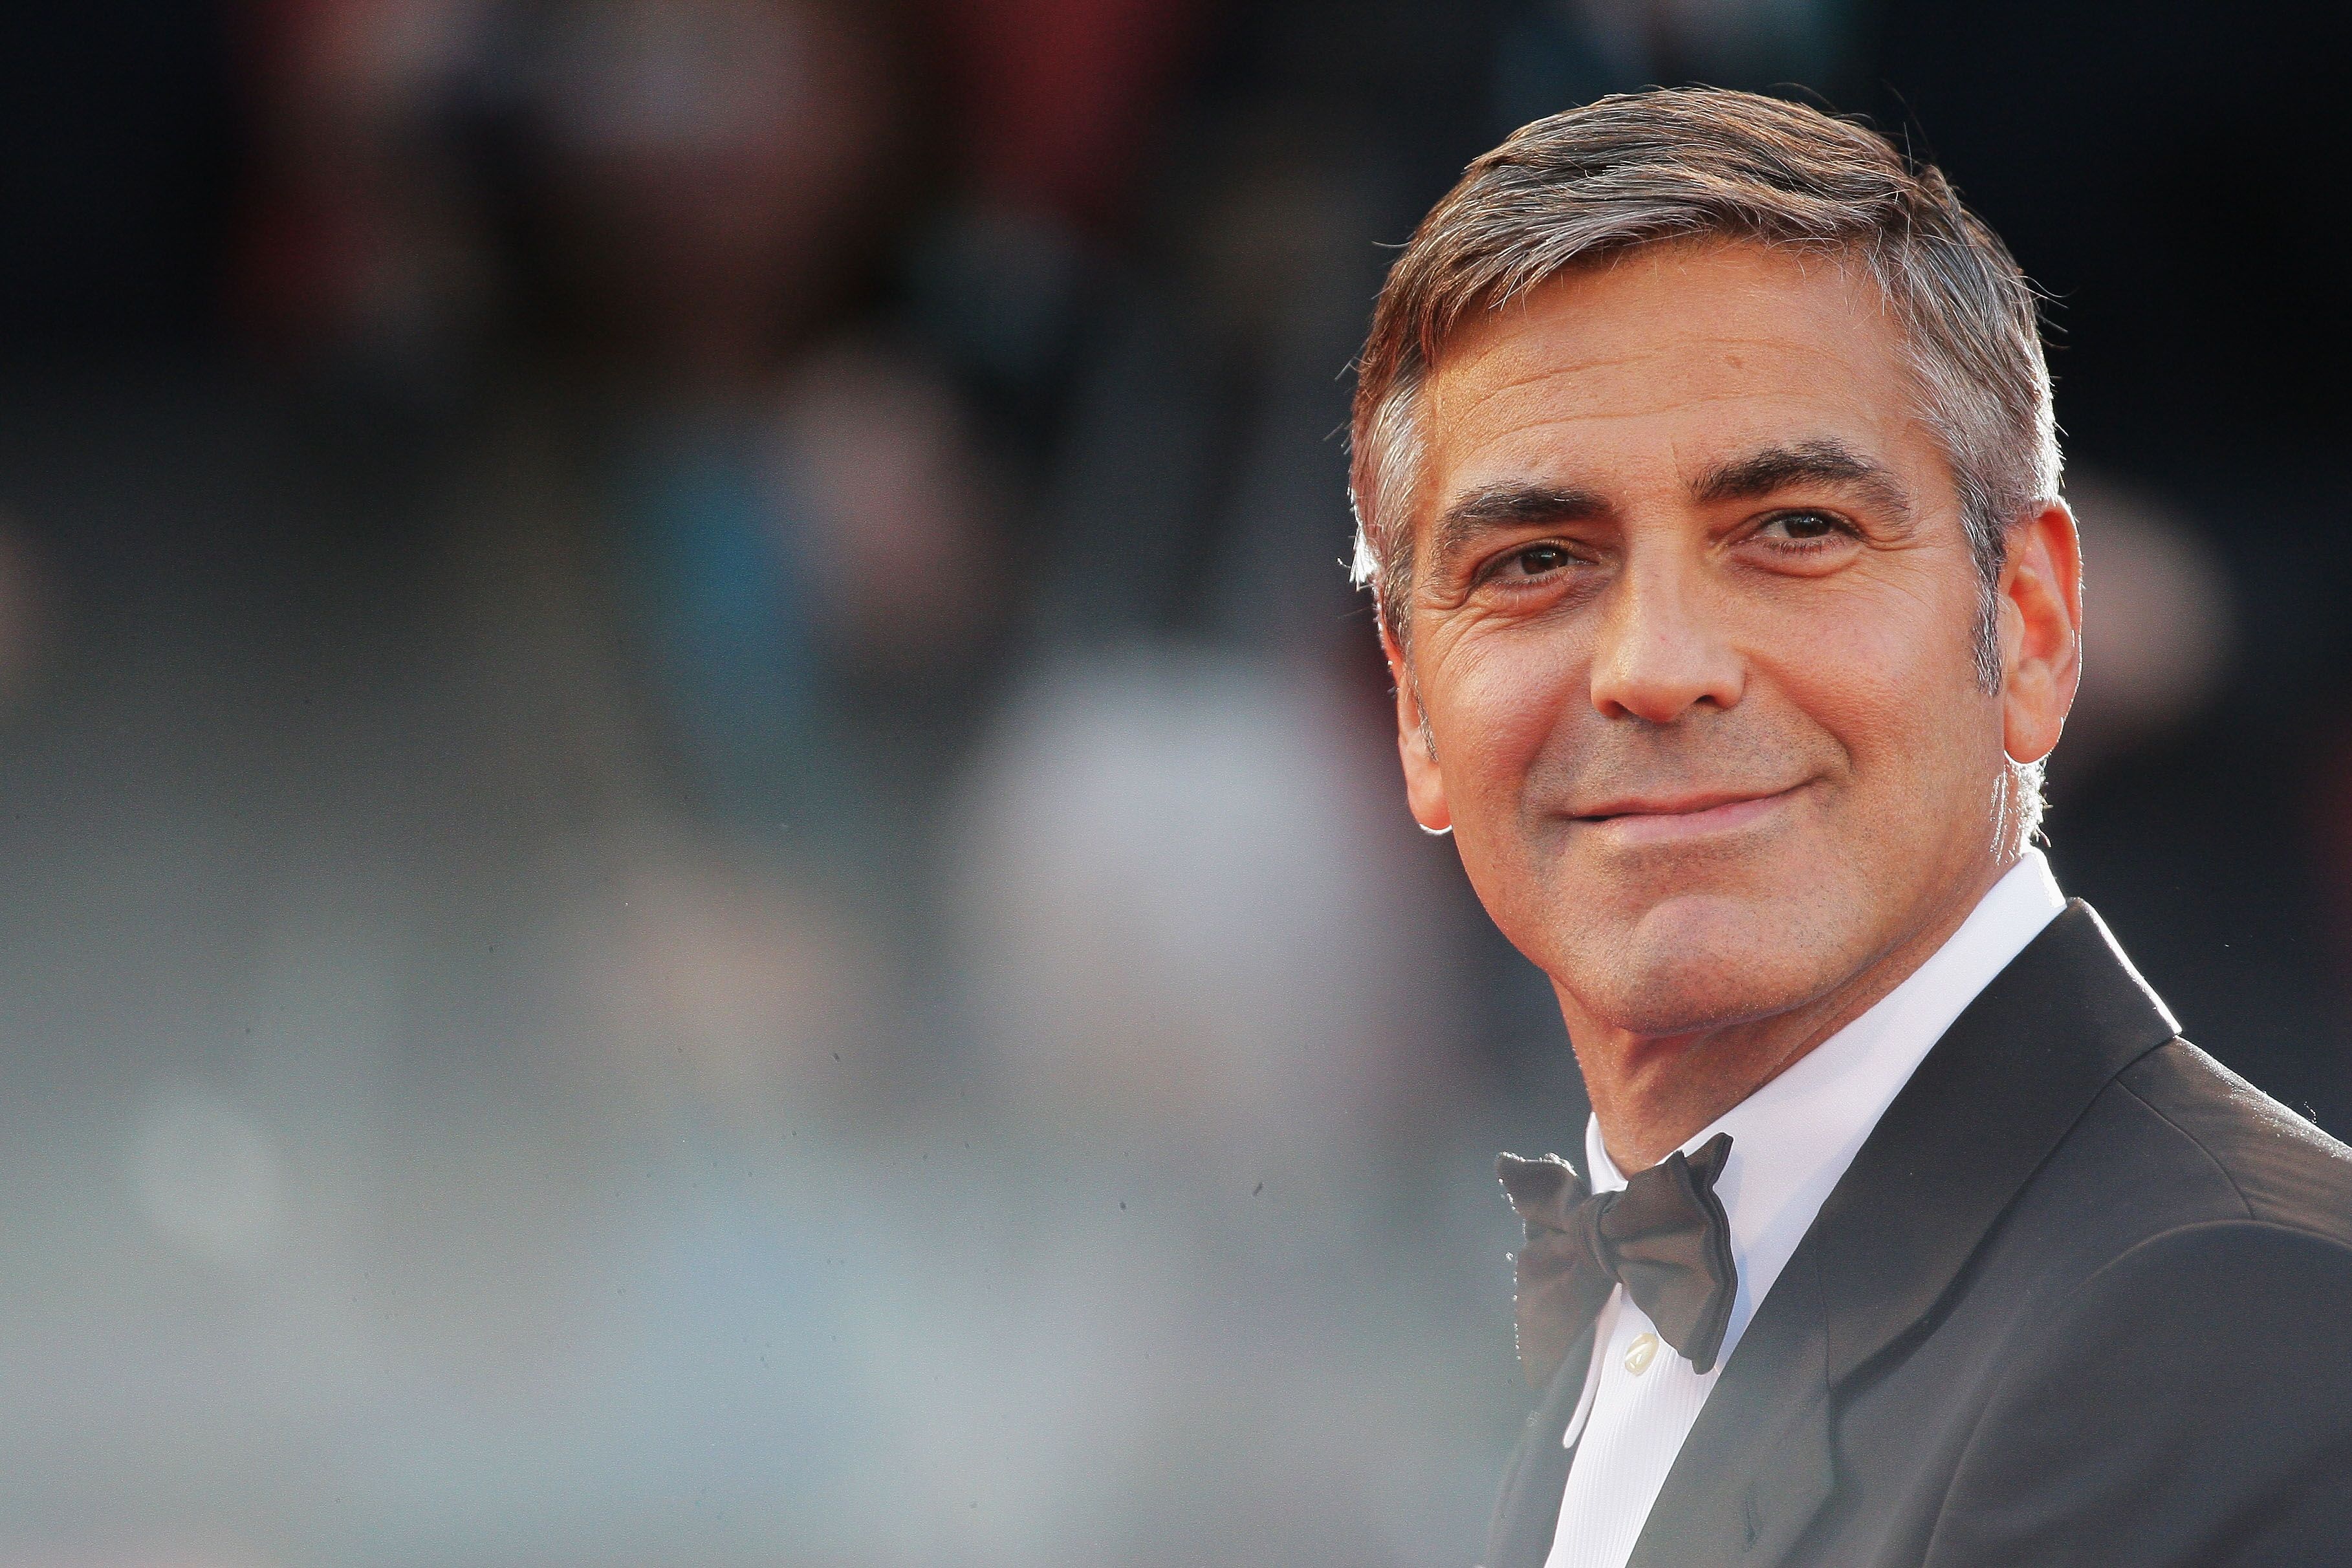 George Clooney at "The Men Who Stare At Goats" premiere at the Sala Grande  on September 8, 2009 | Photo: Getty Images